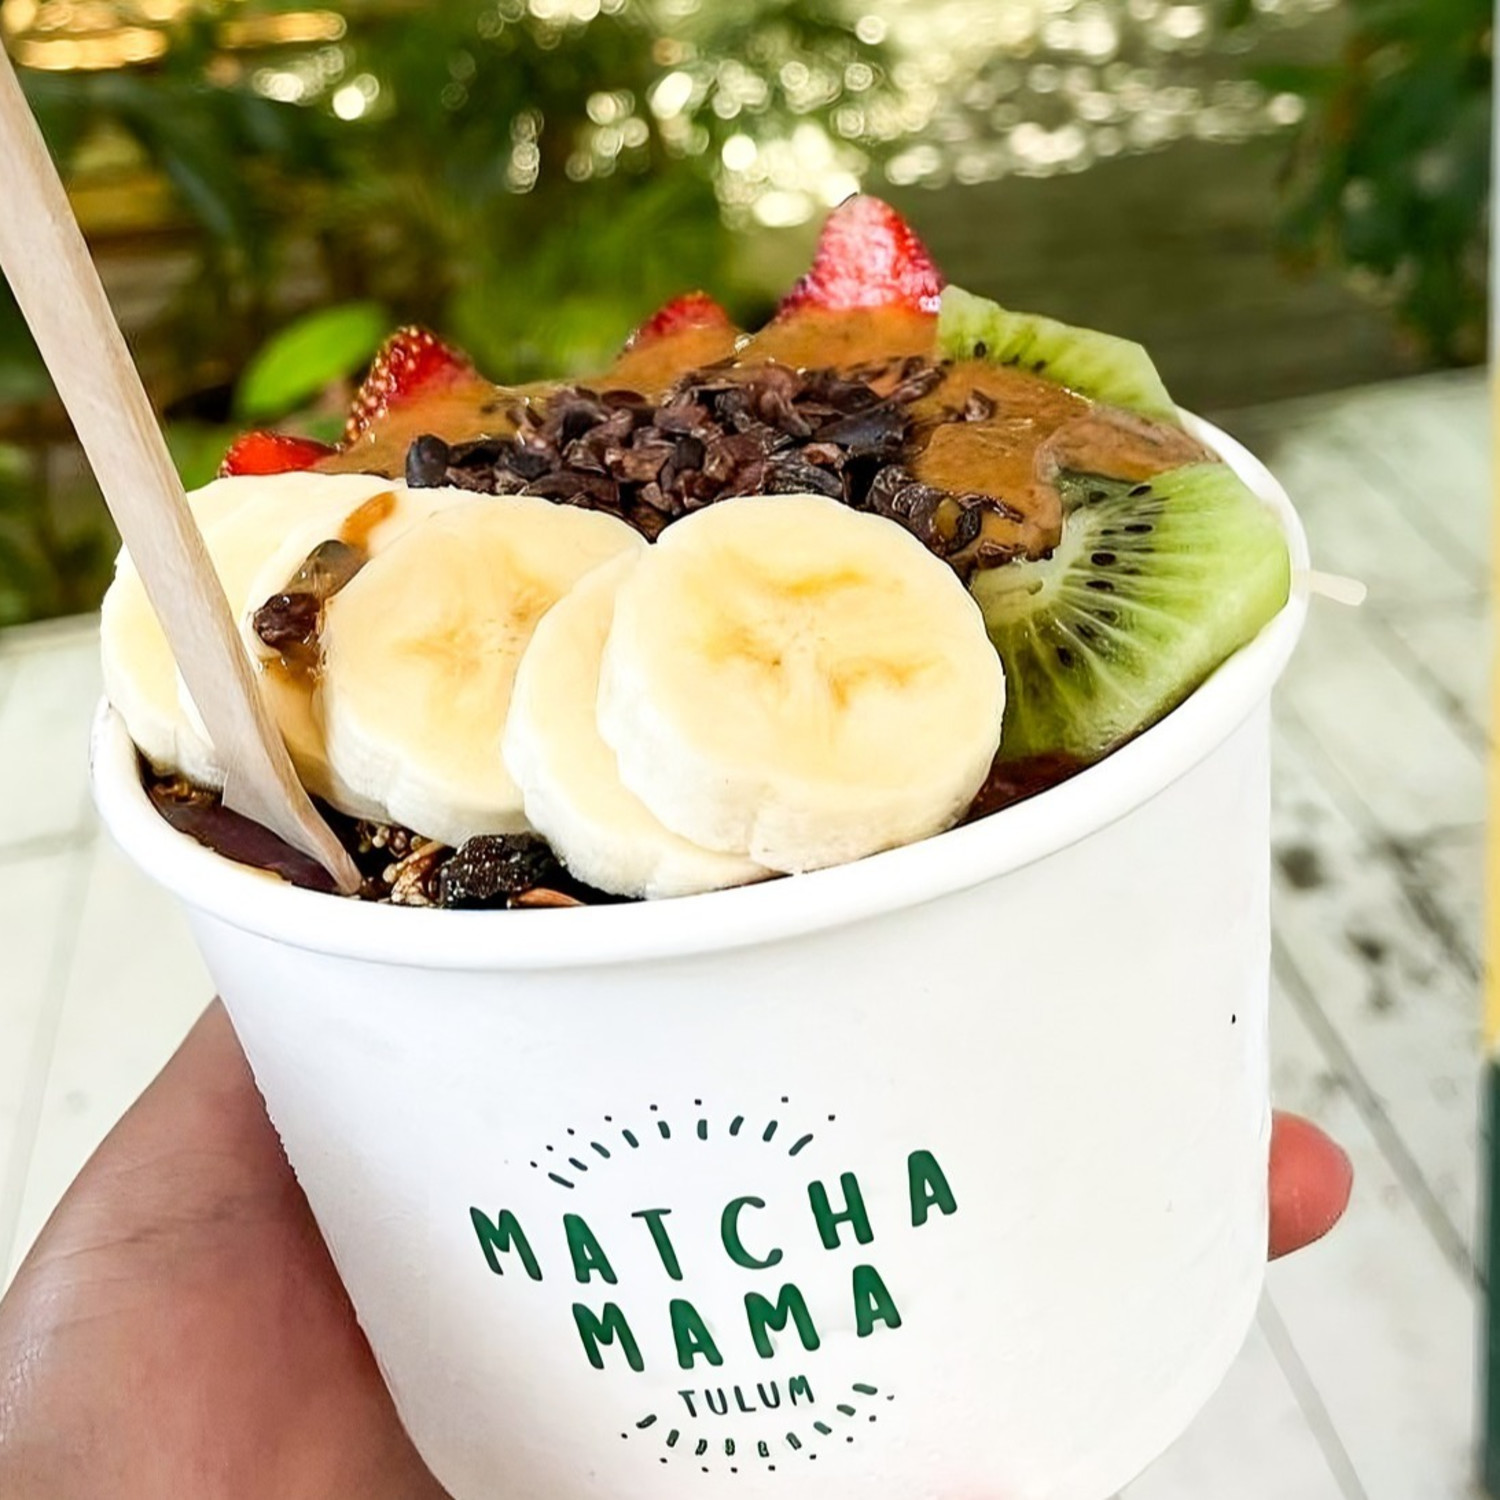 Matcha Mama are products served fresh and healthy.